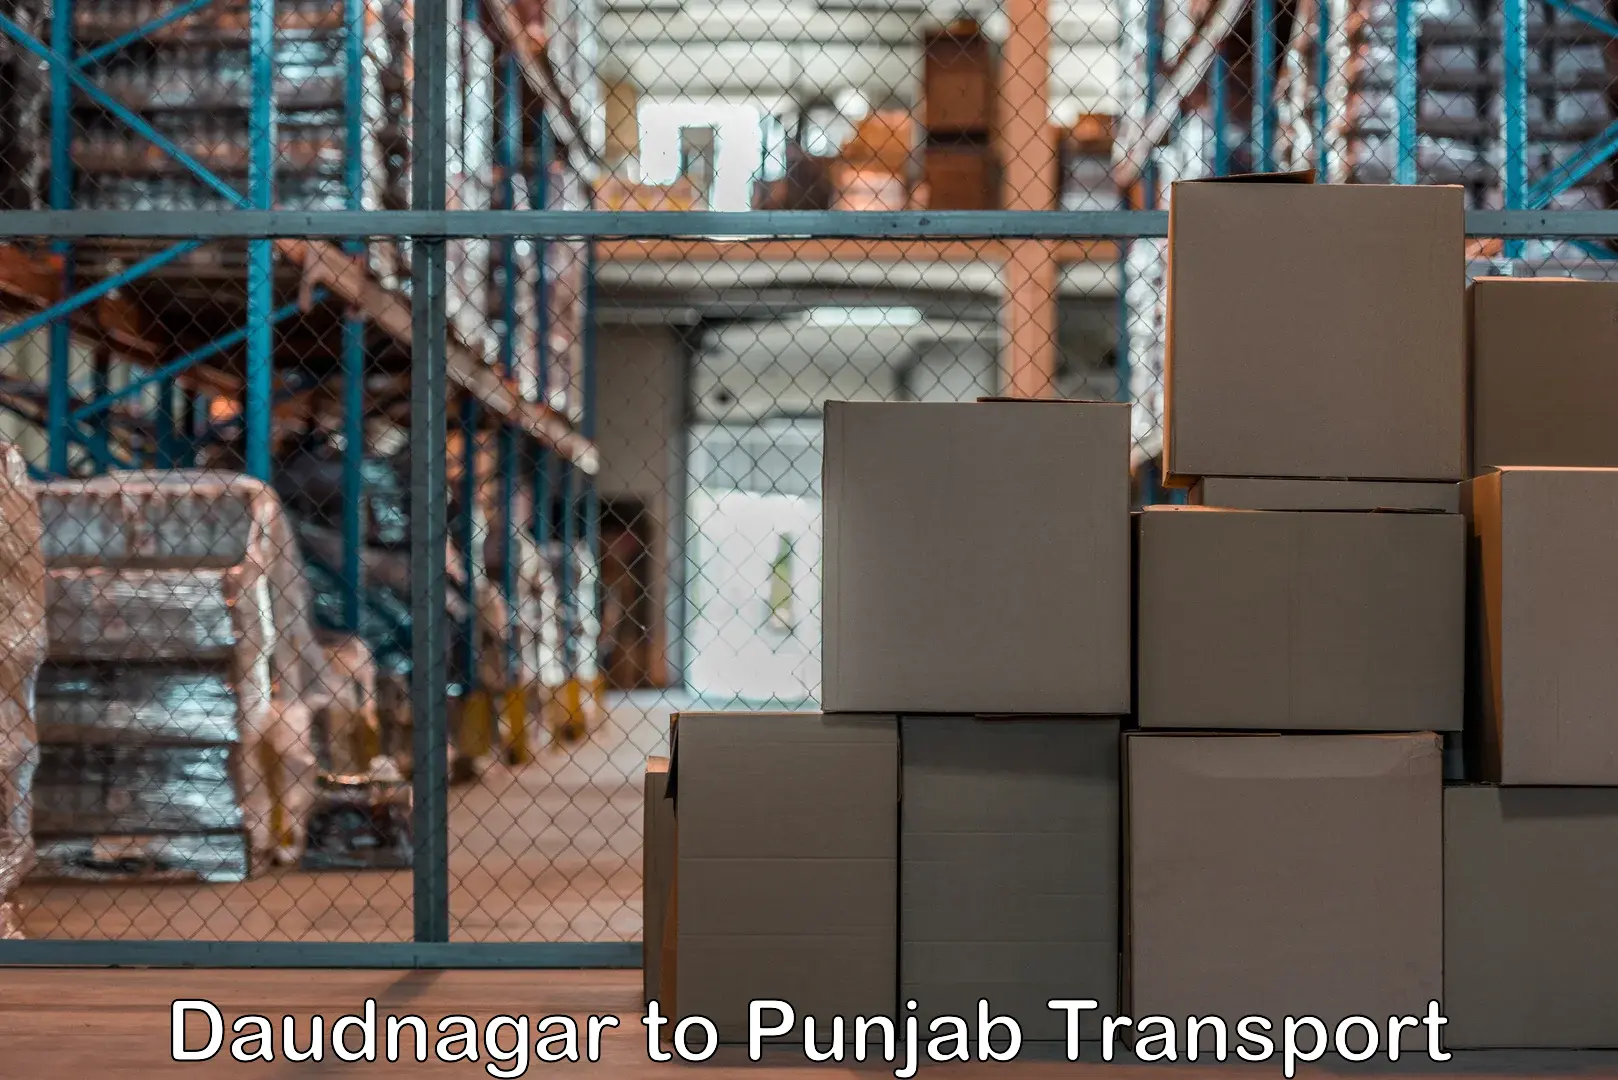 Transport bike from one state to another Daudnagar to Bathinda